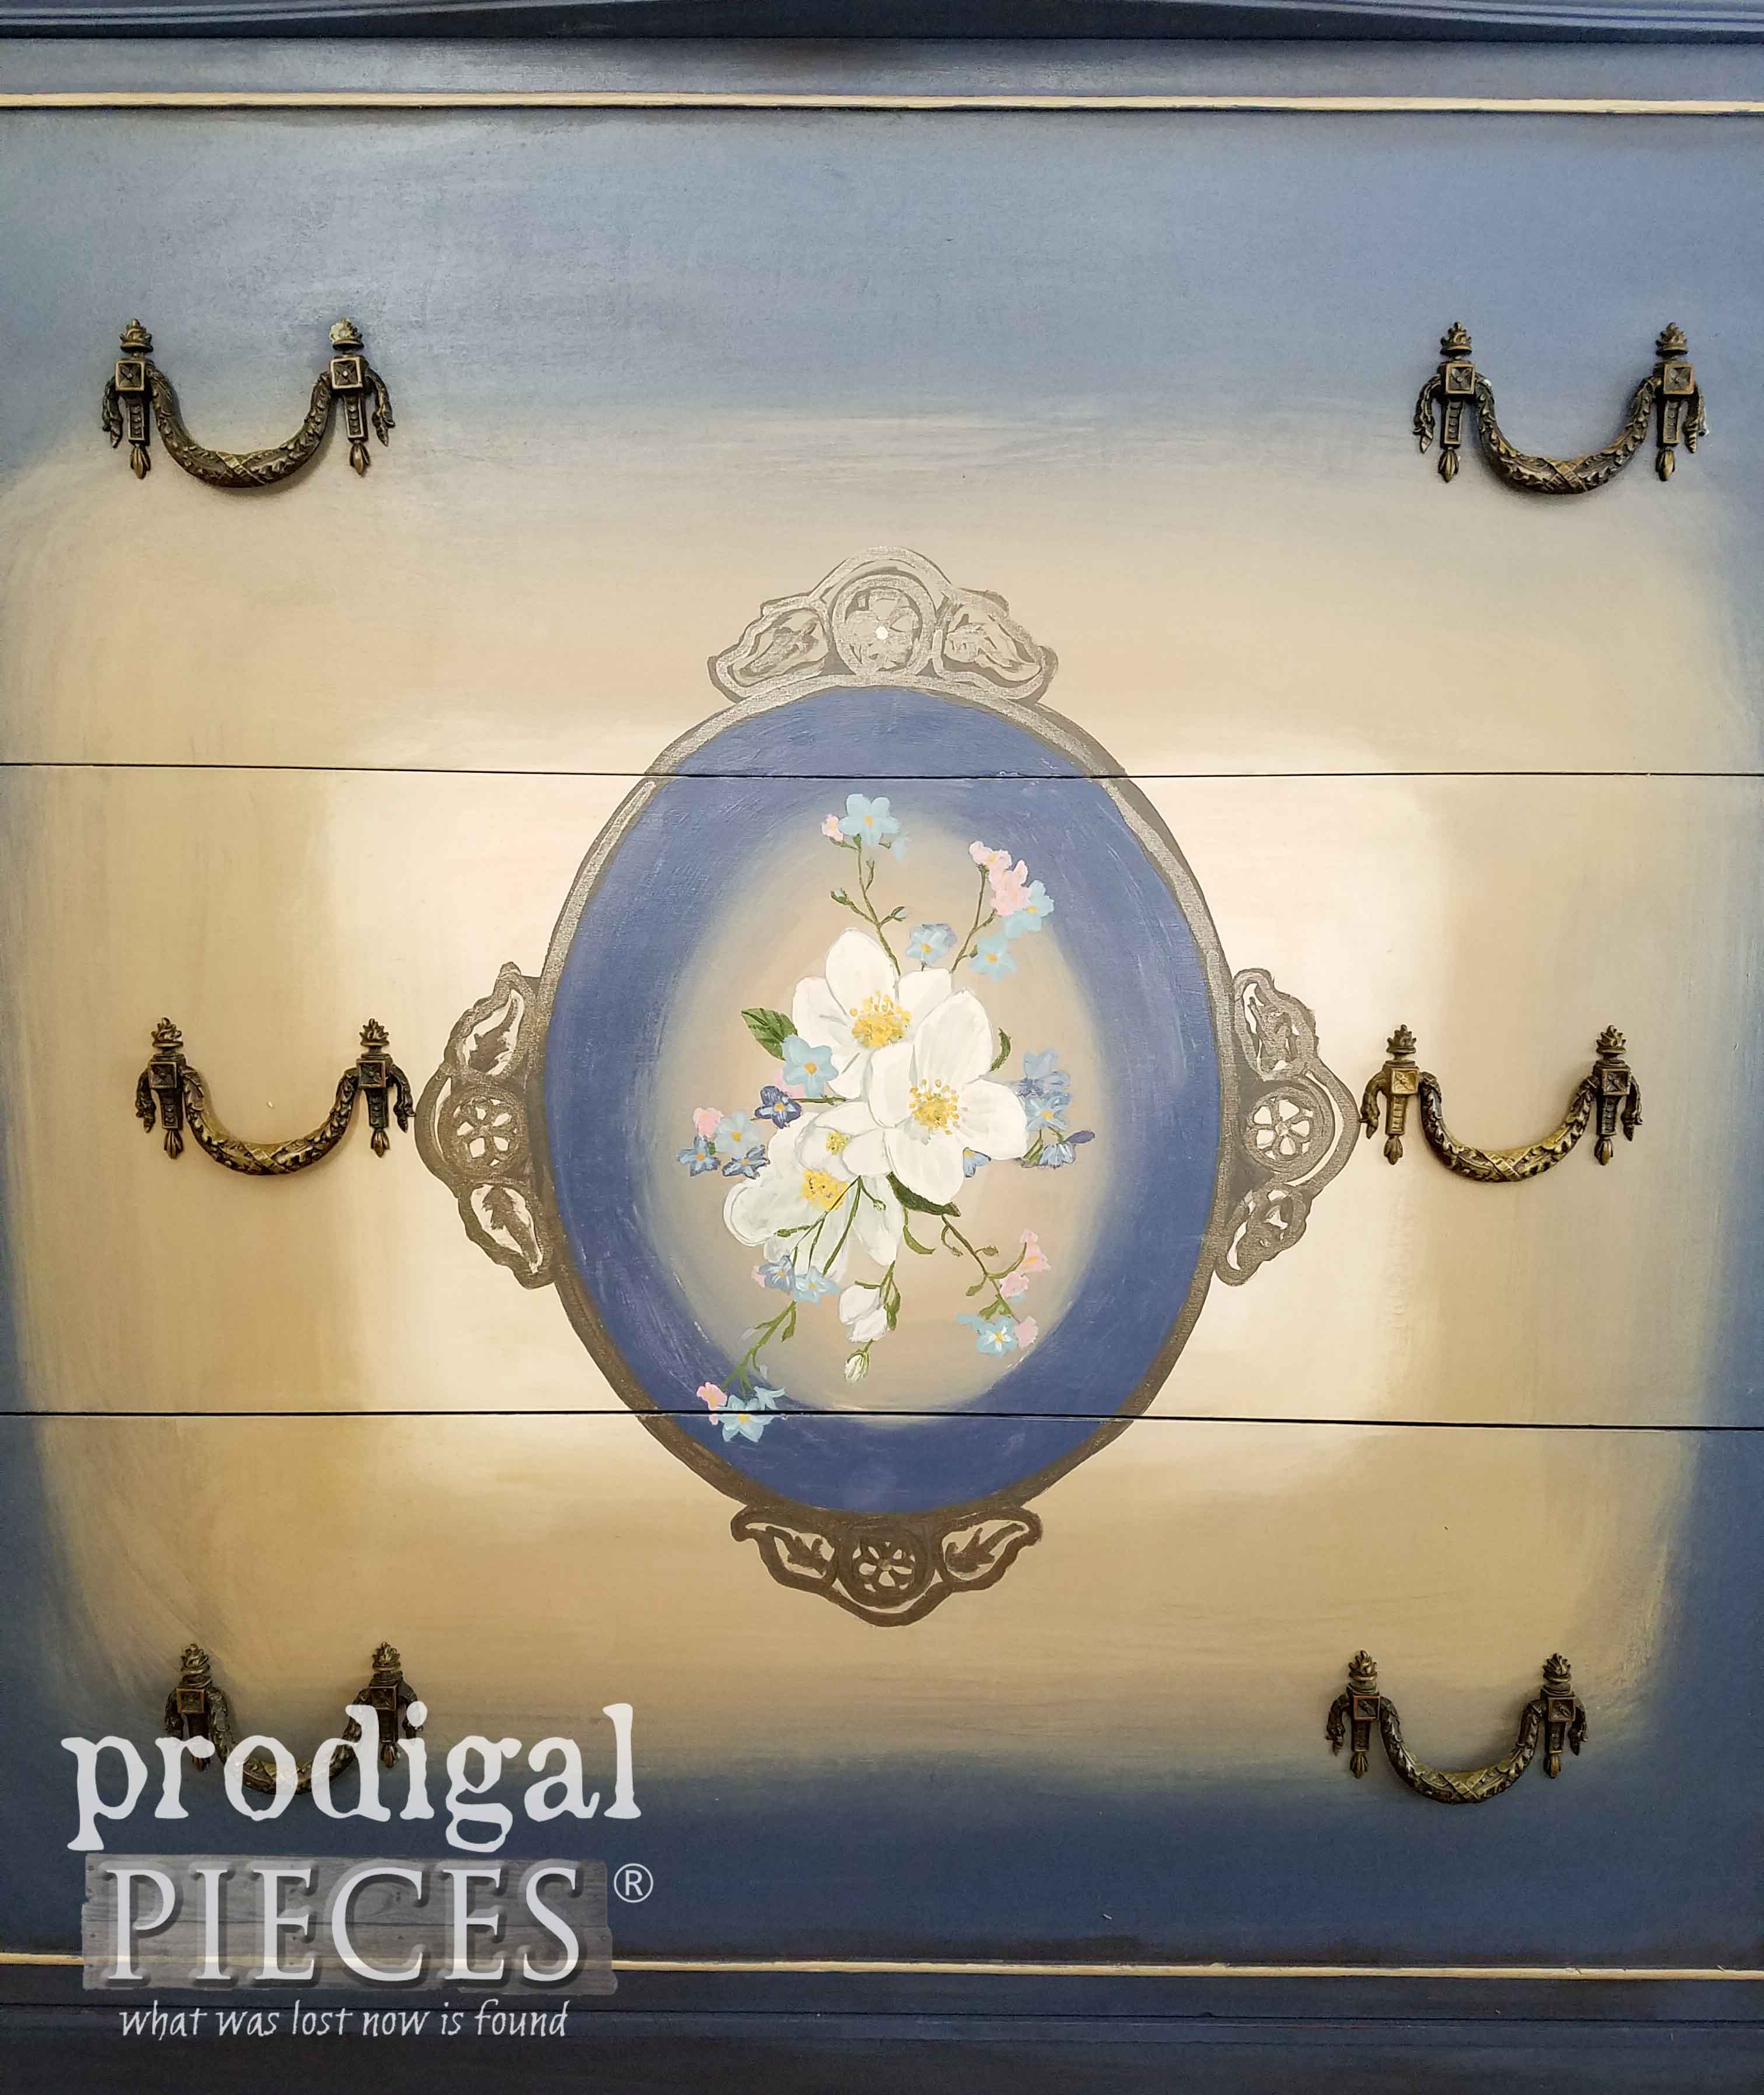 Hand-Painted Florals on this Antique Chest of Drawers by Larissa of Prodigal Pieces | prodigalpieces.com